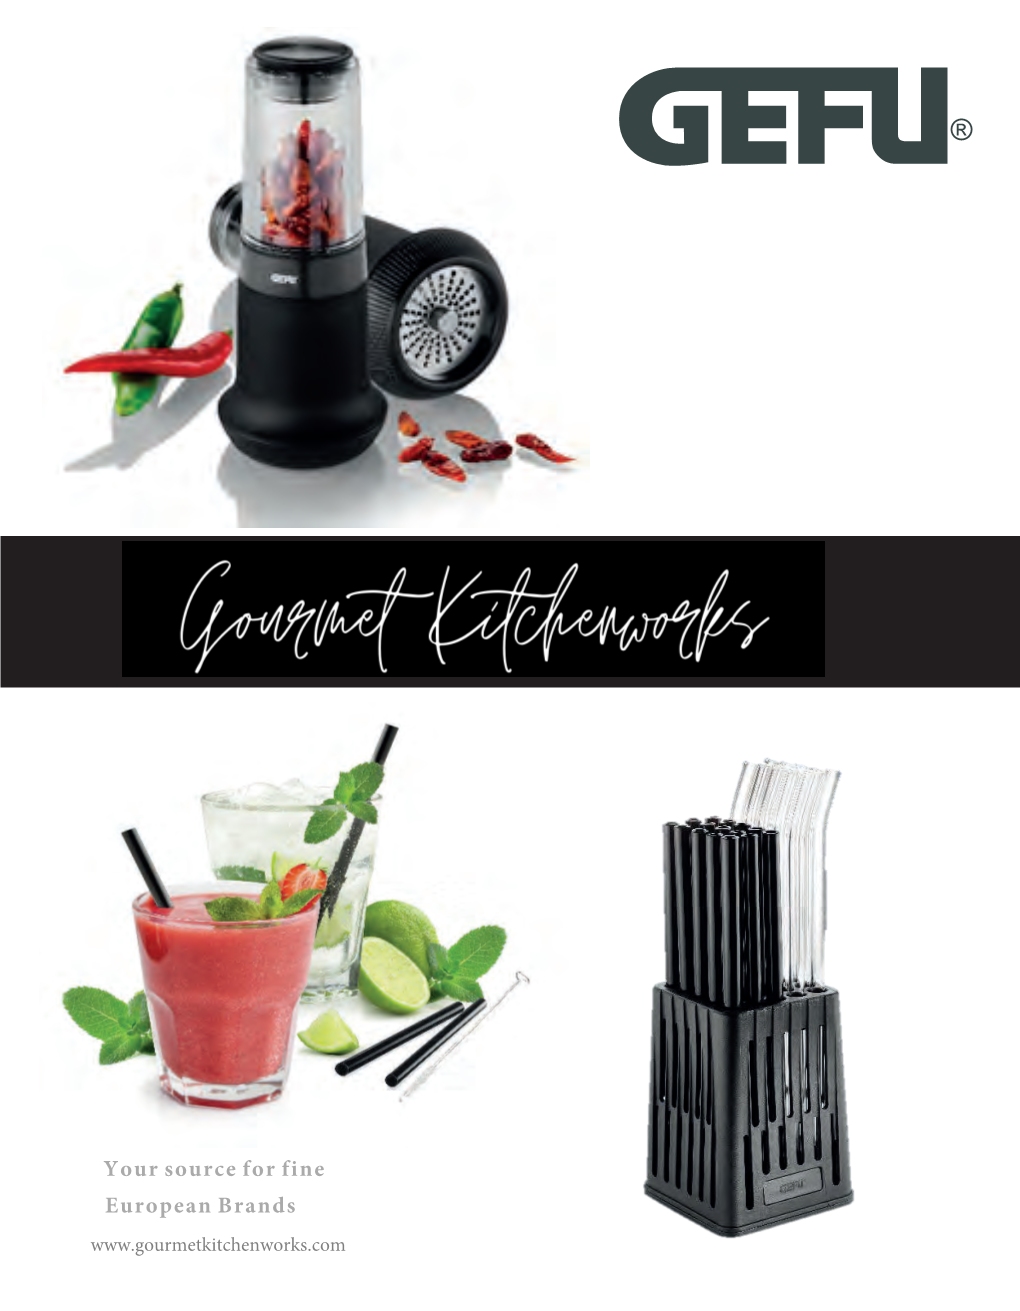 GEFU X-PLOSION® Design Series Sets New Standards in Seasoning with Ingenious Grinders, Super-Sharp Chilli Cutters, Stylish Shakers and Other Innovations